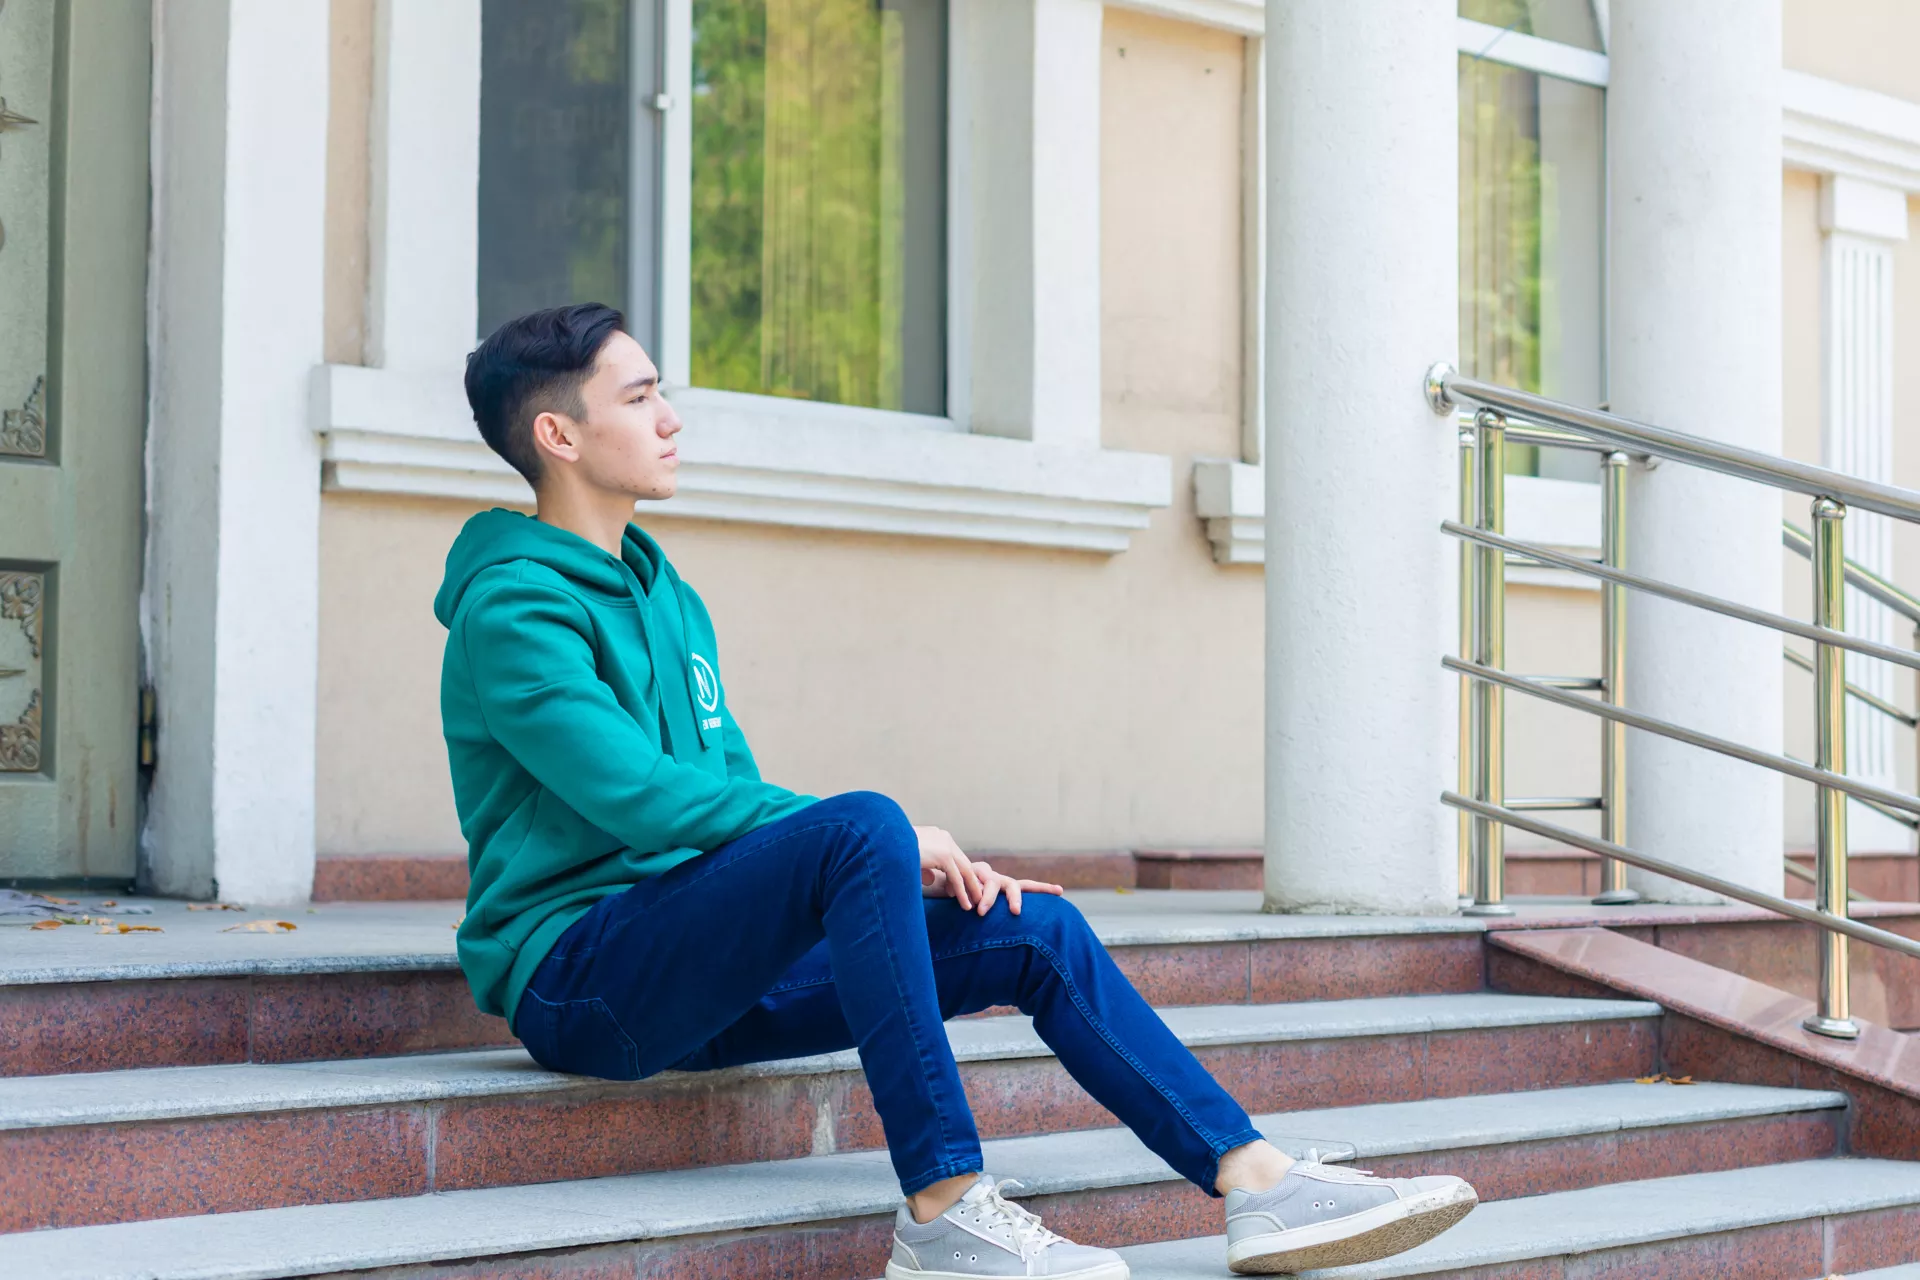 A young boy from Kazakhstan sitting on a stairway